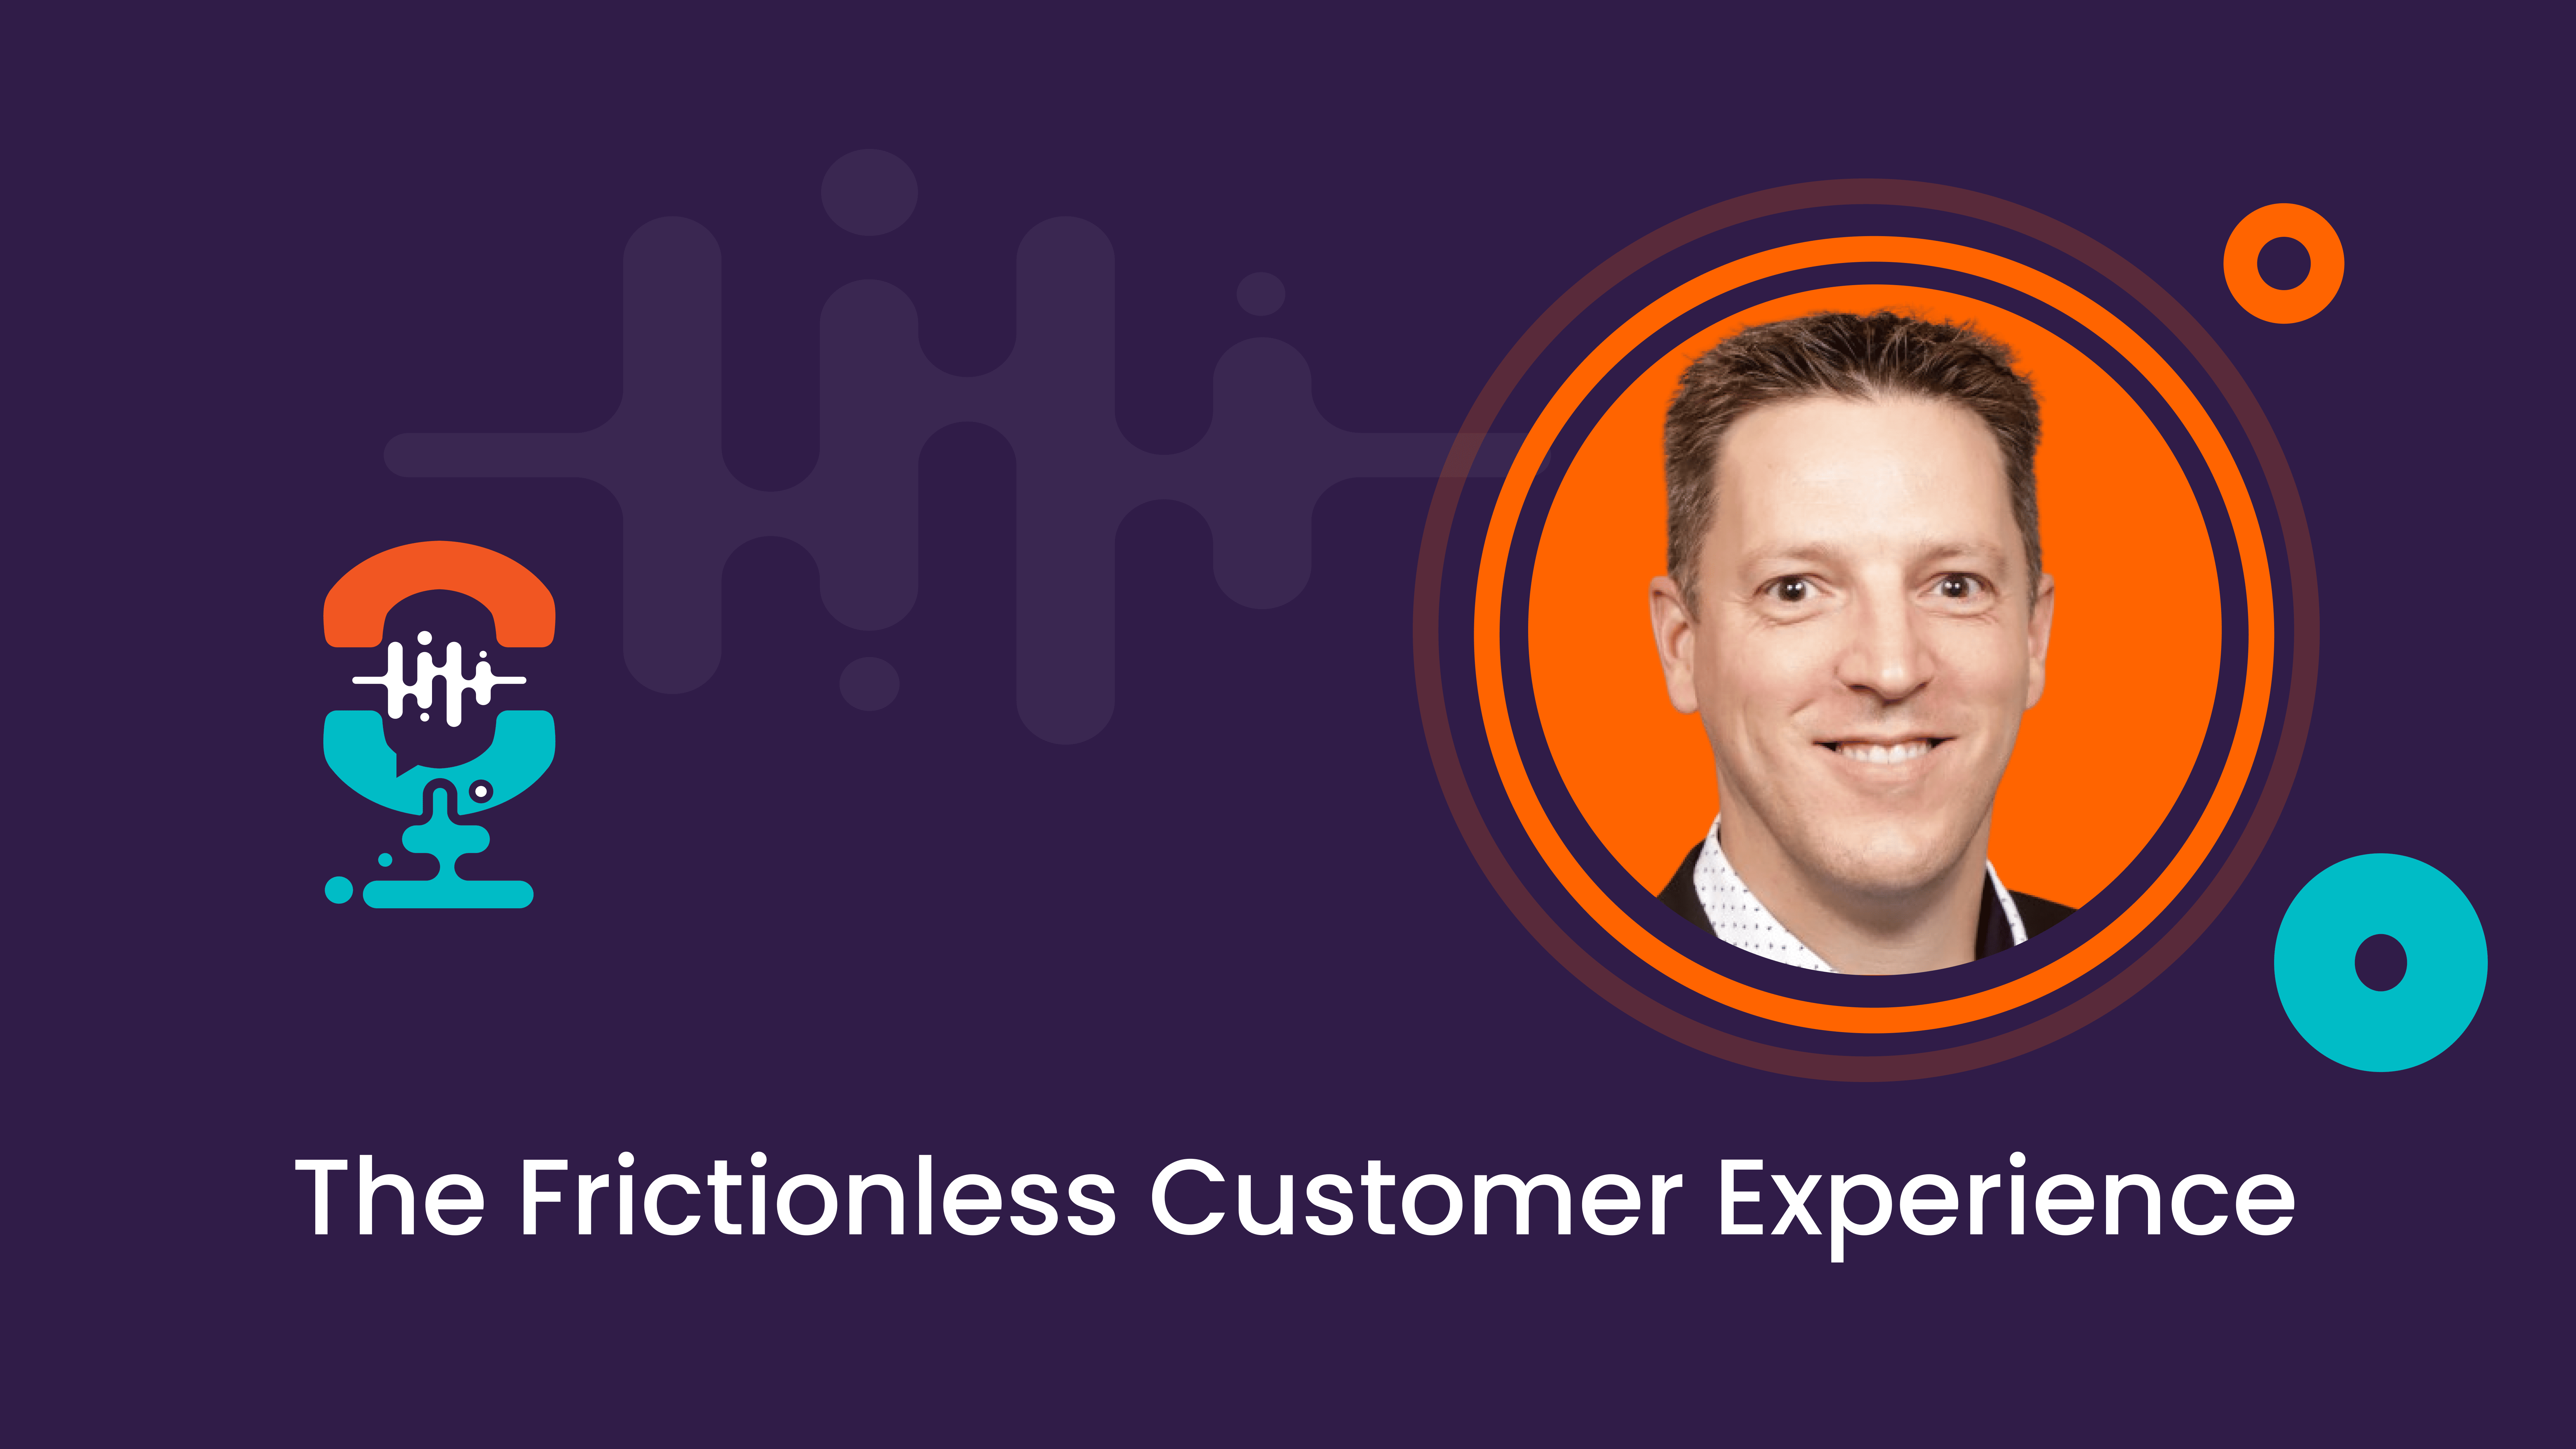 The Frictionless Customer Experience